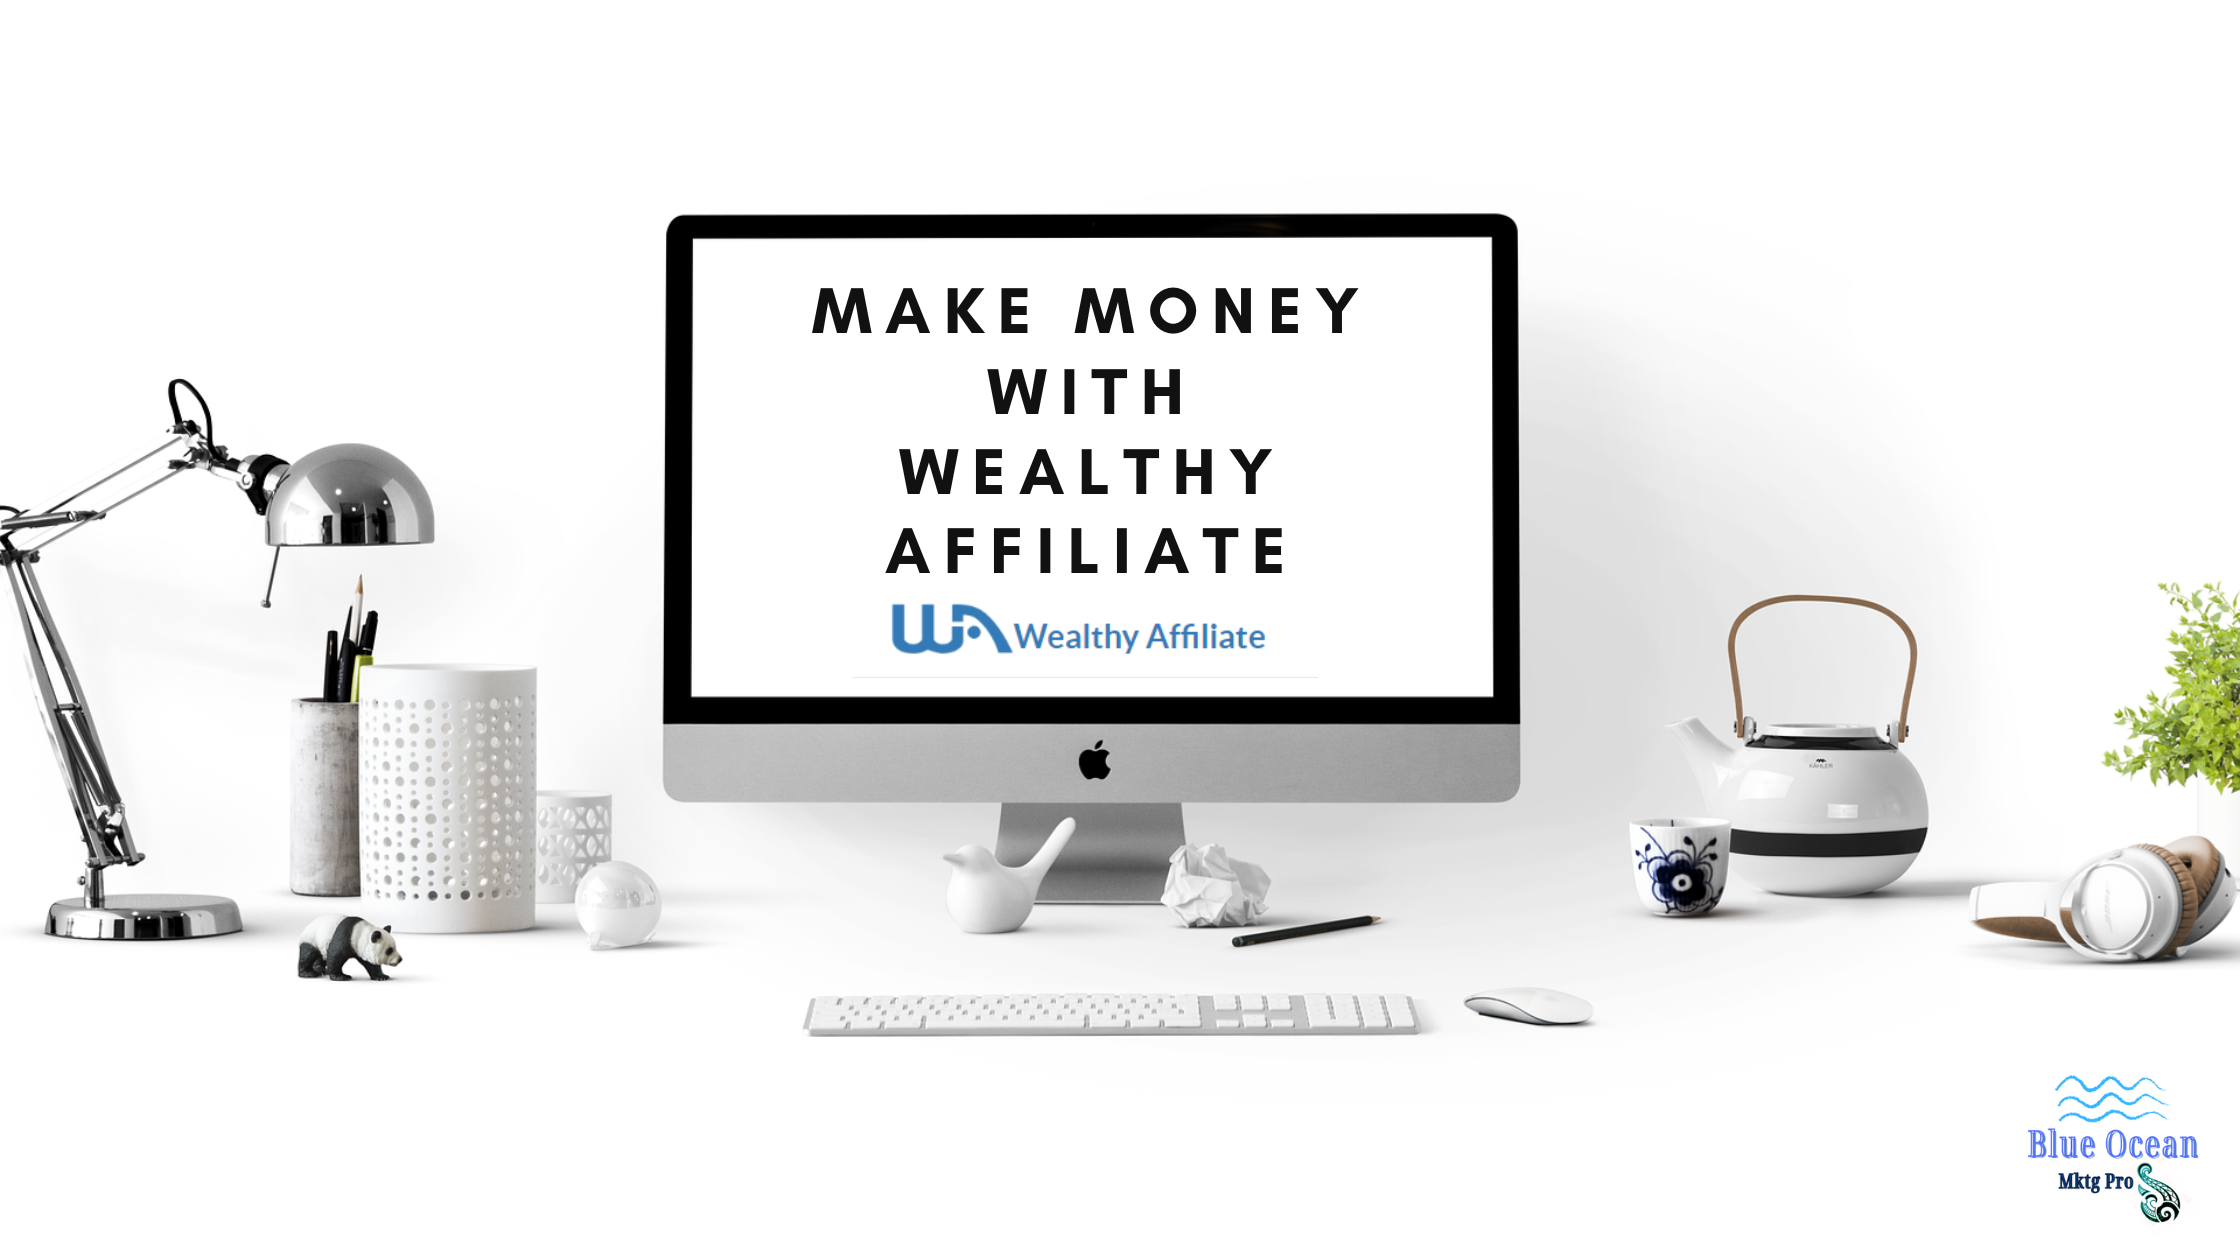 Make Money With Wealthy Affiliate-Feature Image for Blog Banner, a image of PC Screen, and a desk with white background